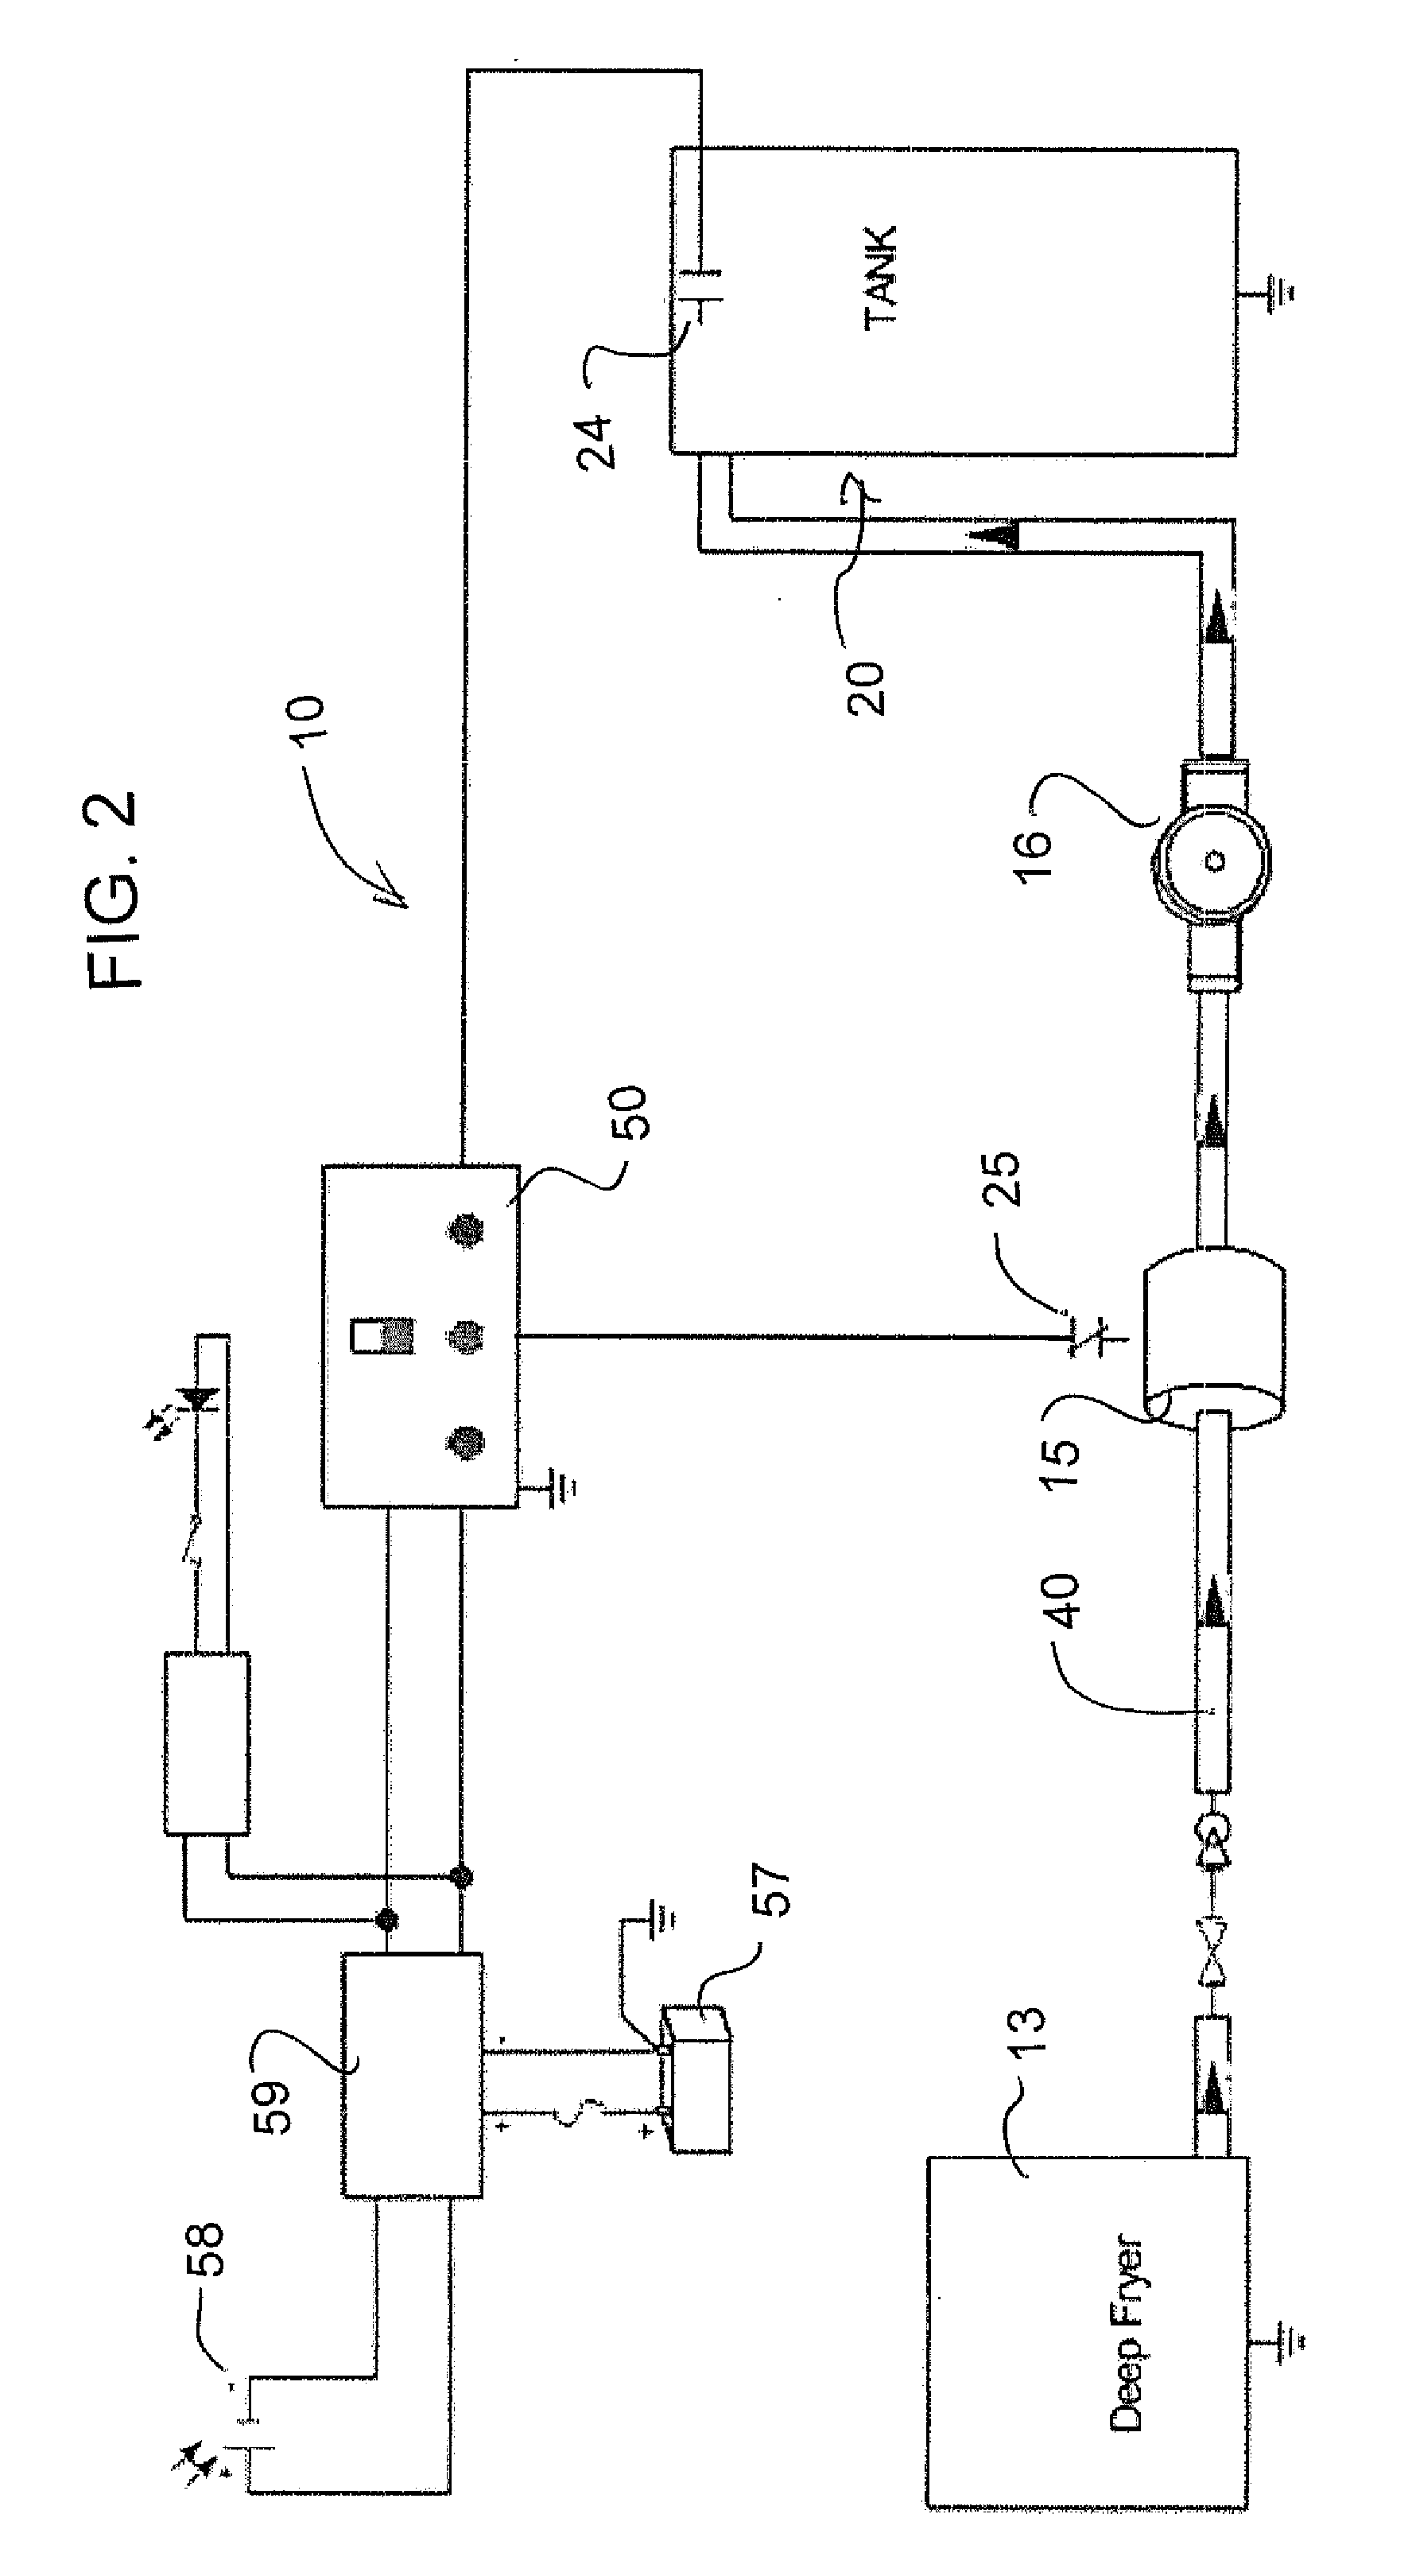 Method for Storing Used Cooking Oil